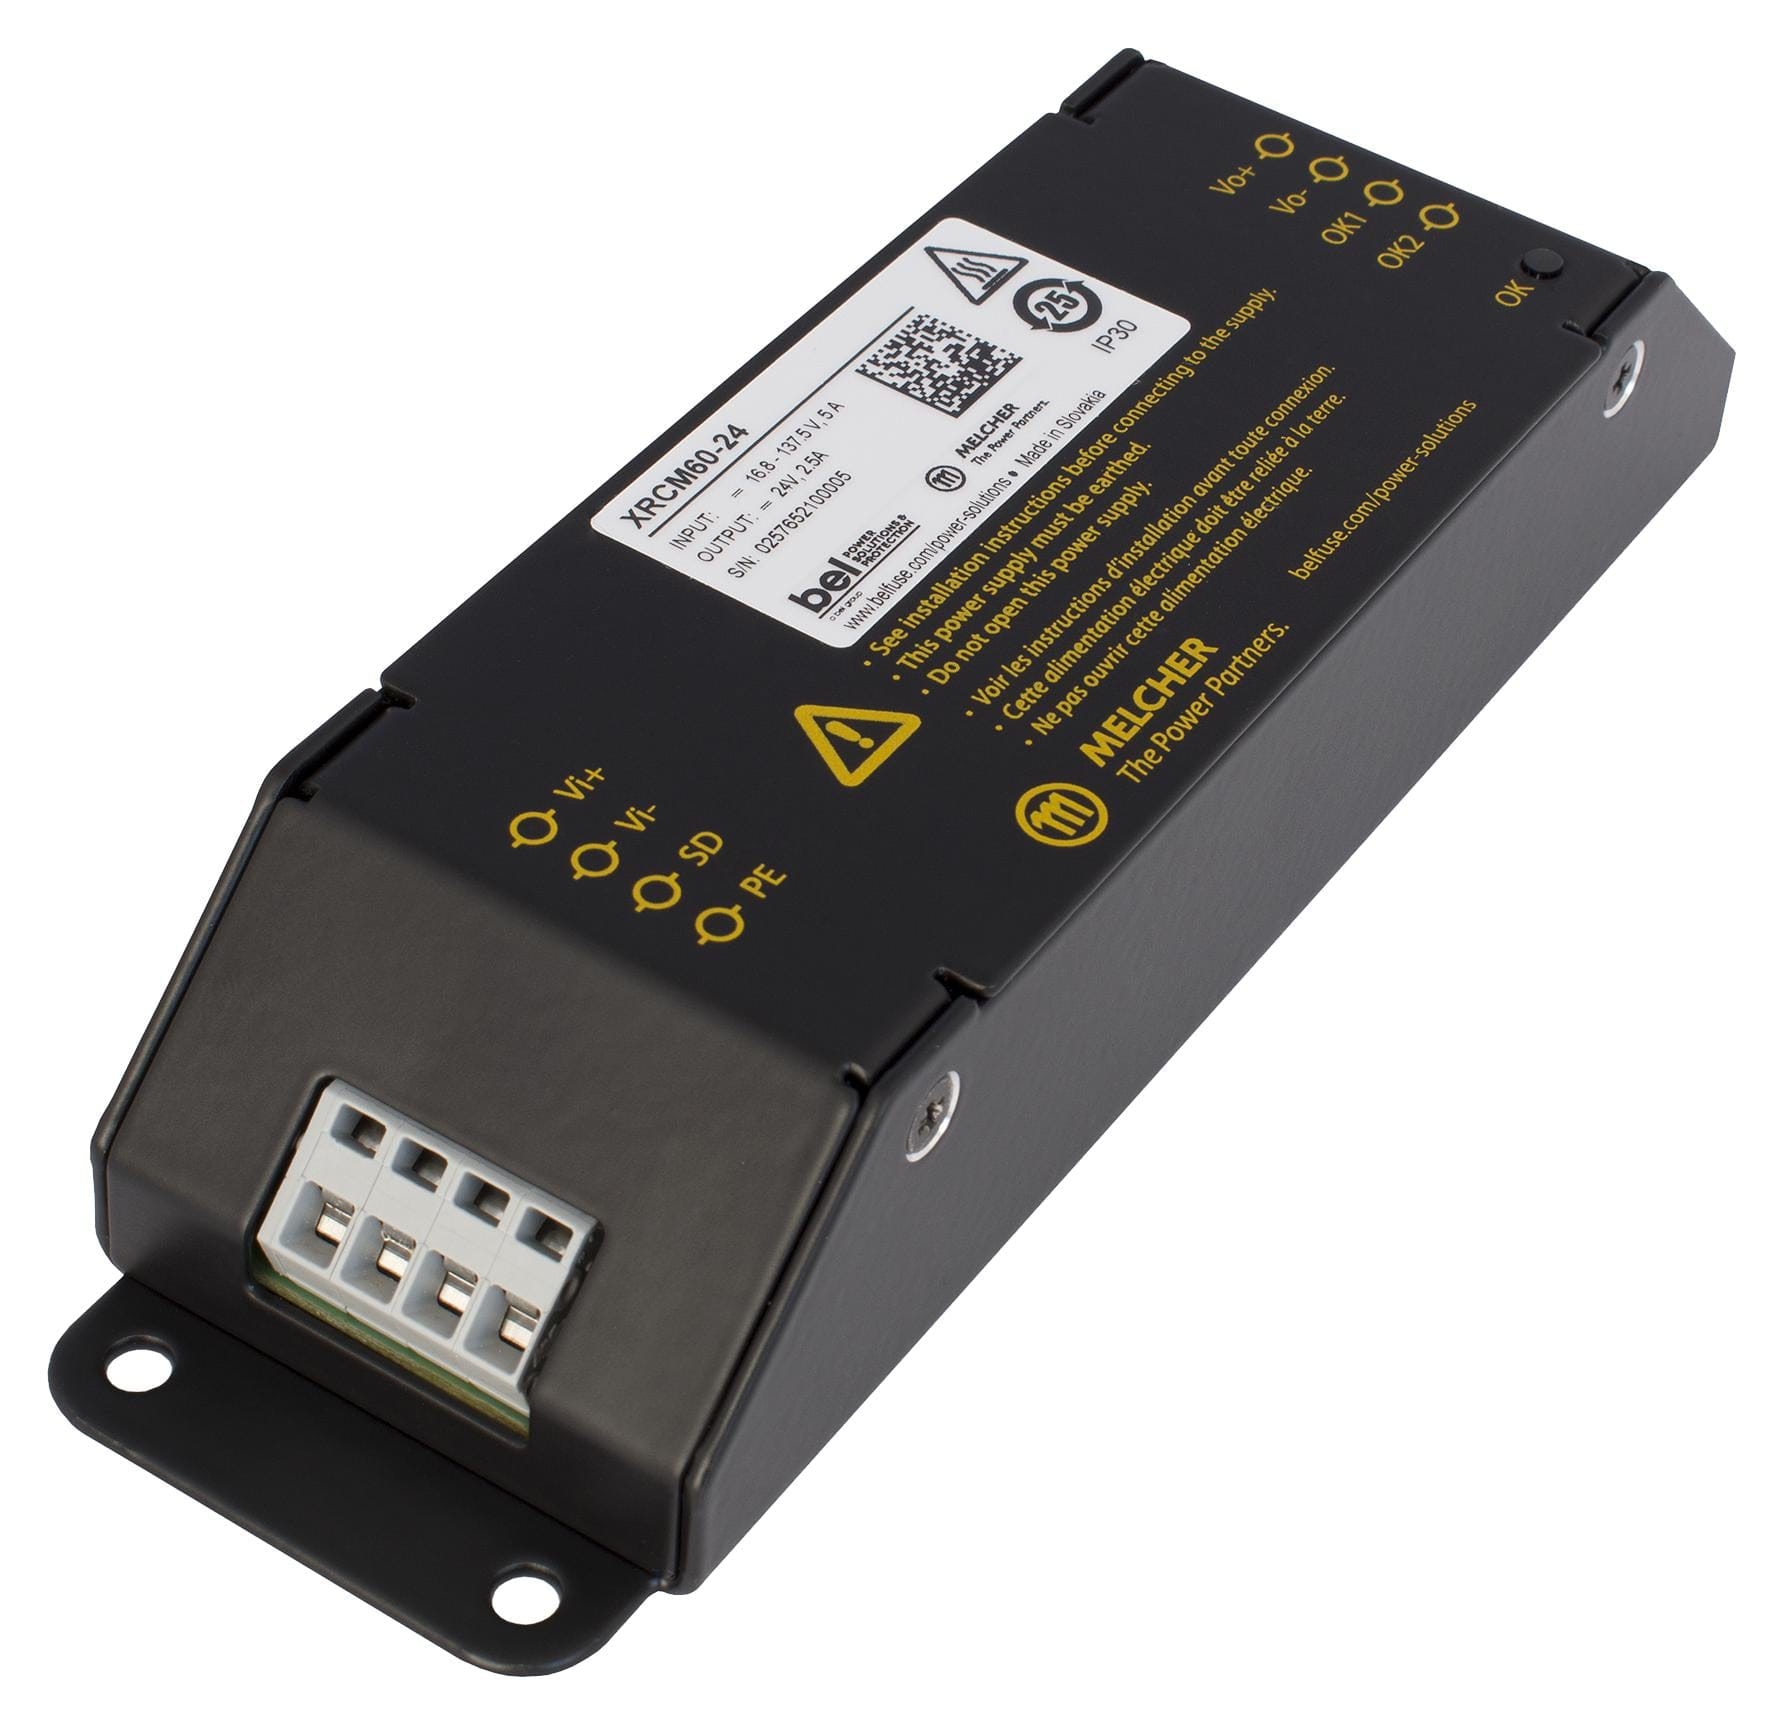 BEL POWER SOLUTIONS Modules / DIN Rail / Front End XRCM60-15 DC-DC CONVERTER, 15V, 4A BEL POWER SOLUTIONS 3499676 XRCM60-15